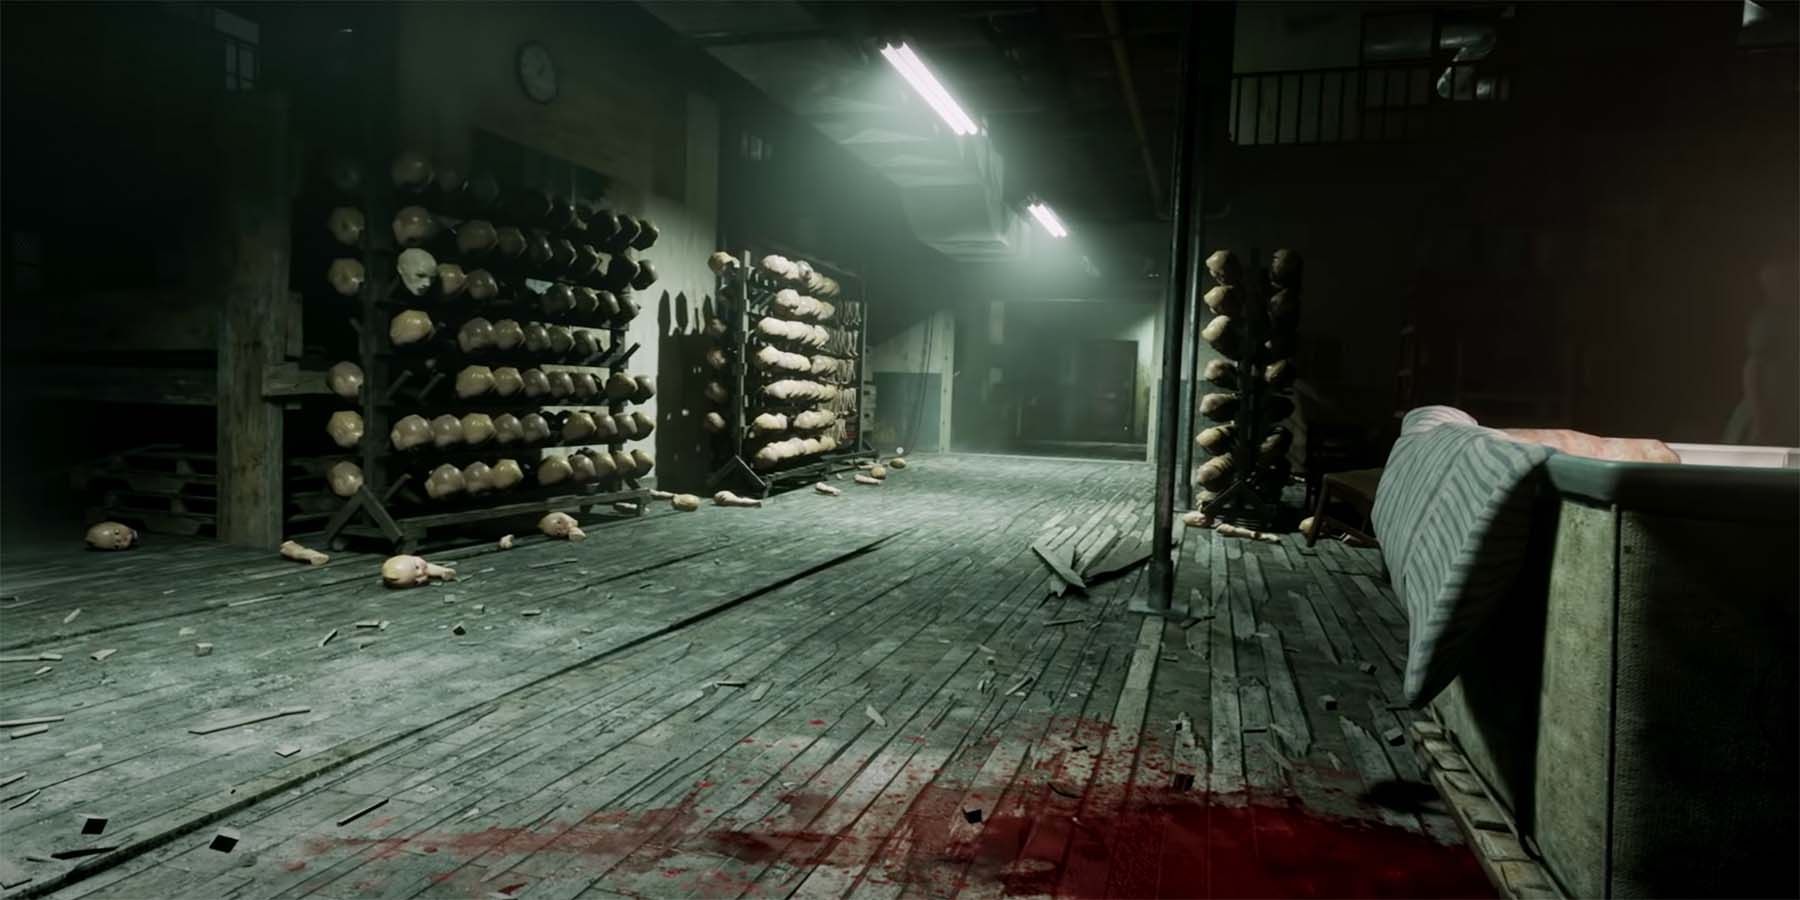 will the outlast trials be on xbox one